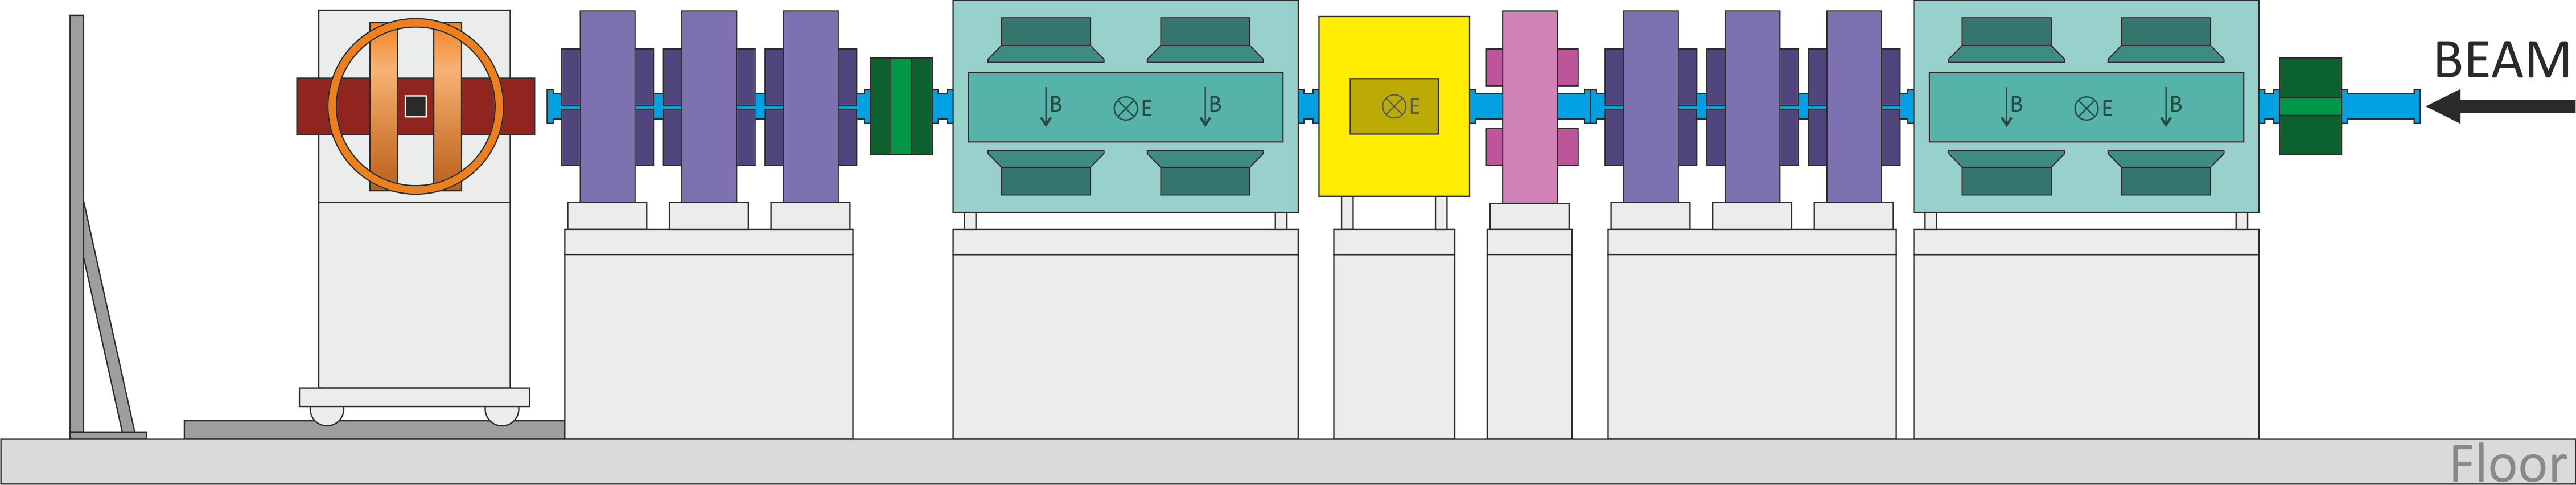 Planned layout of the Super-MuSR beamline and spectrometer